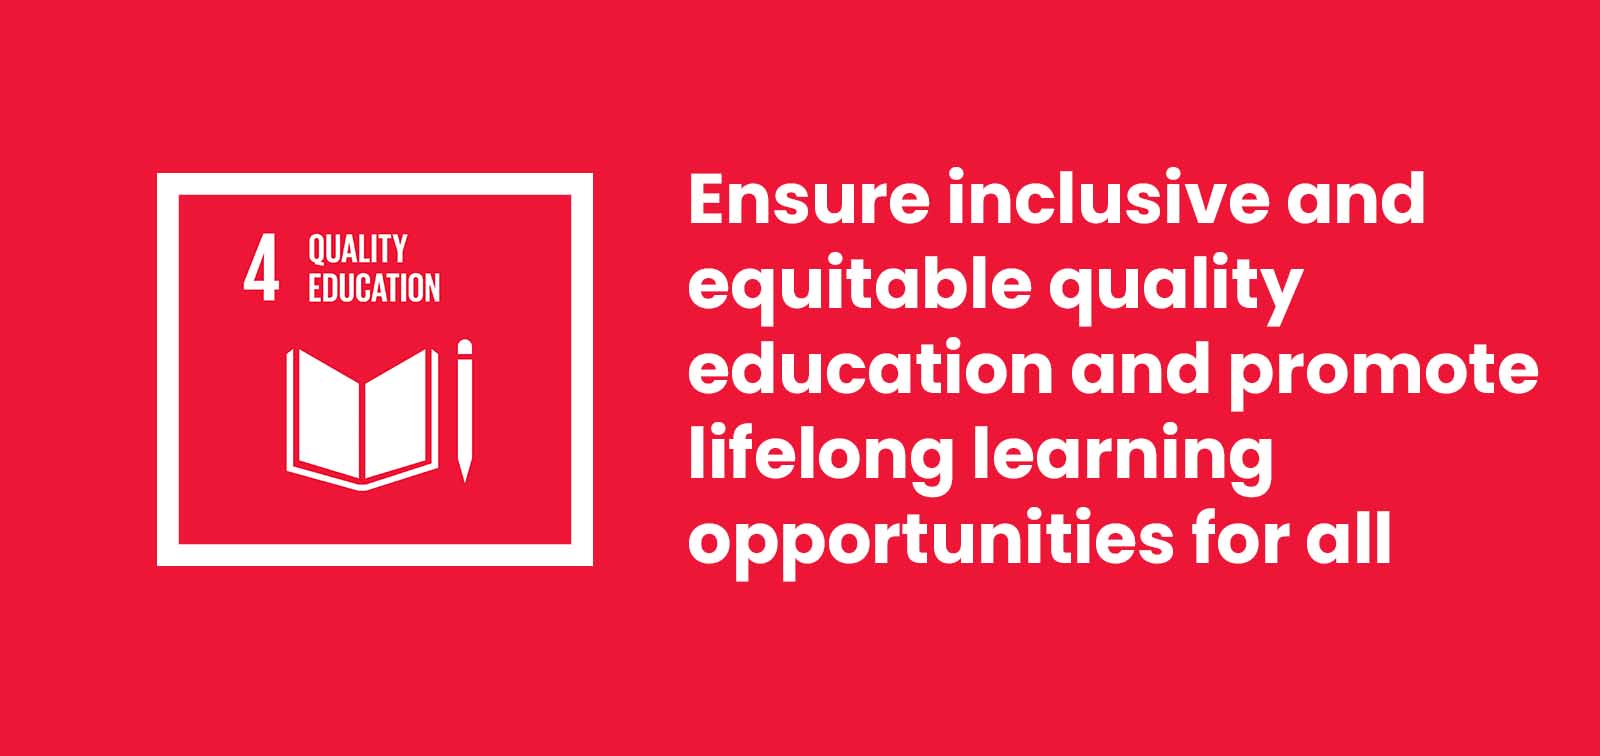 Goal 4: Ensure inclusive and equitable quality education and promote lifelong learning opportunities for all - Project - ISGLOBAL